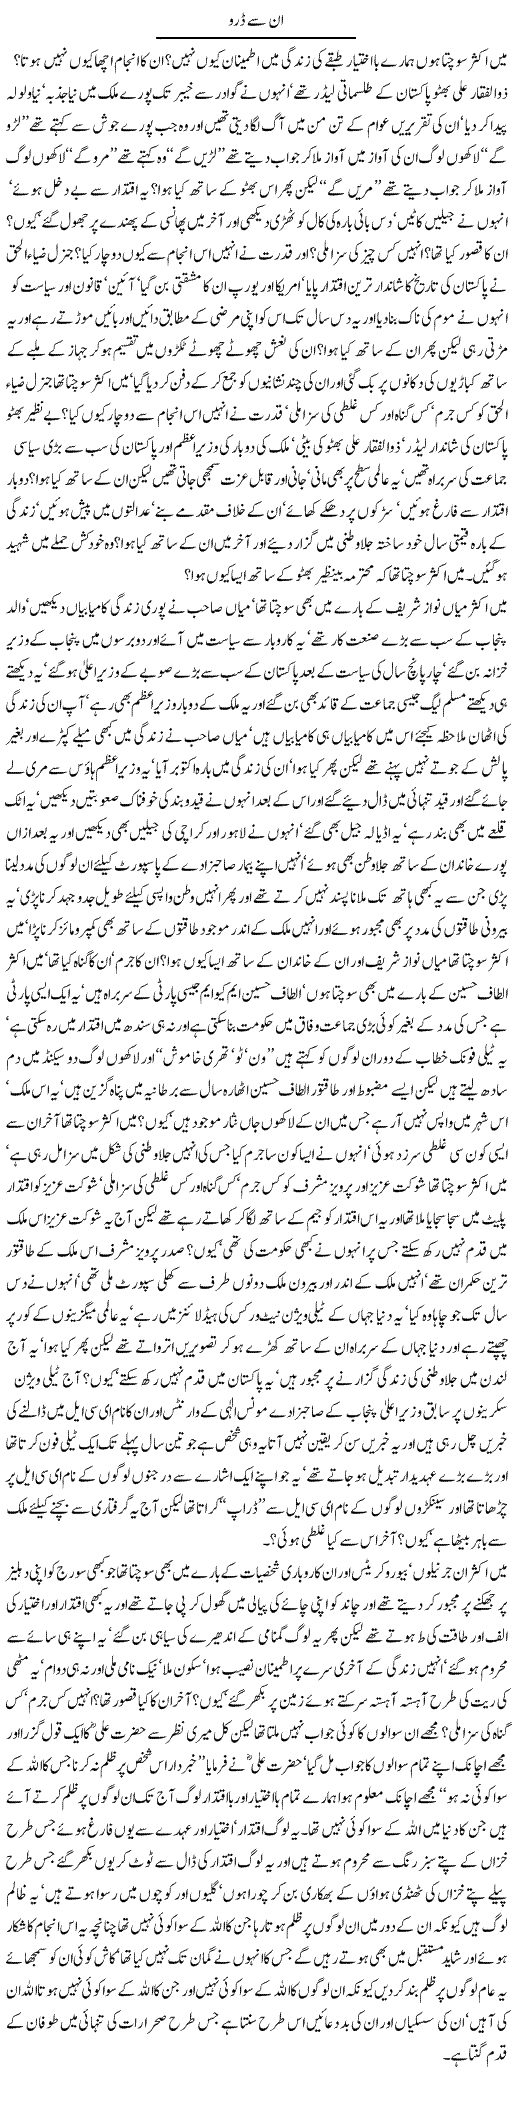 Fear From it Express Column Javed Chaudhry 30 January 2011